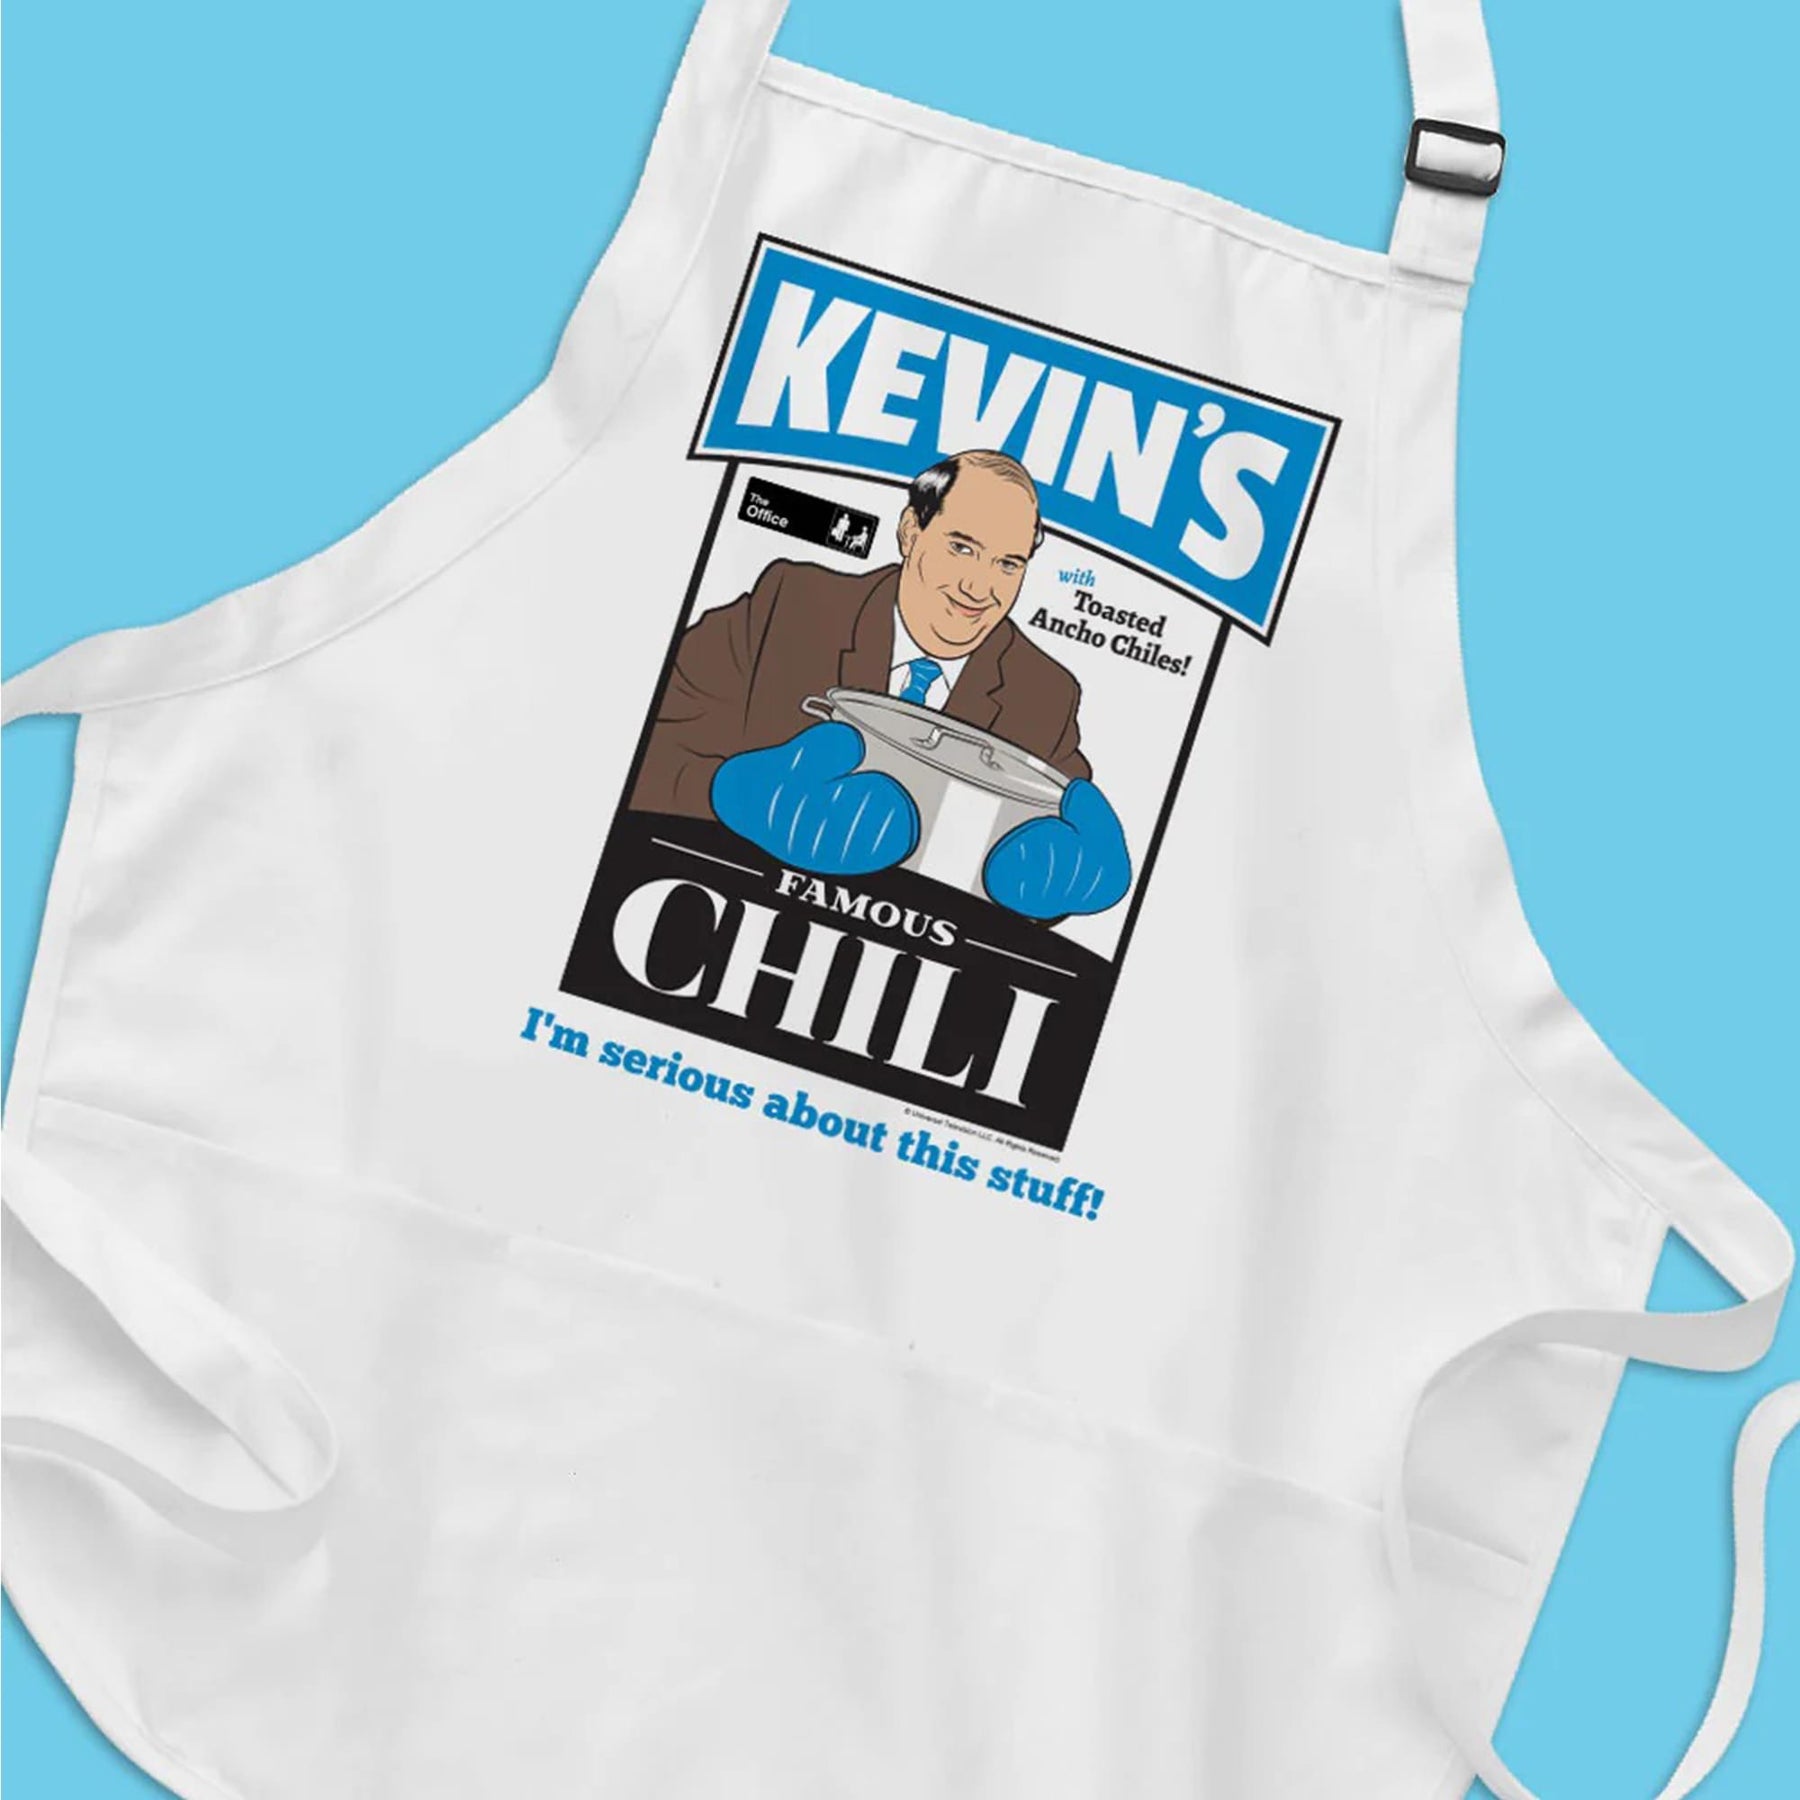 The Office Kevin's Famous Chili Kitchen Apron